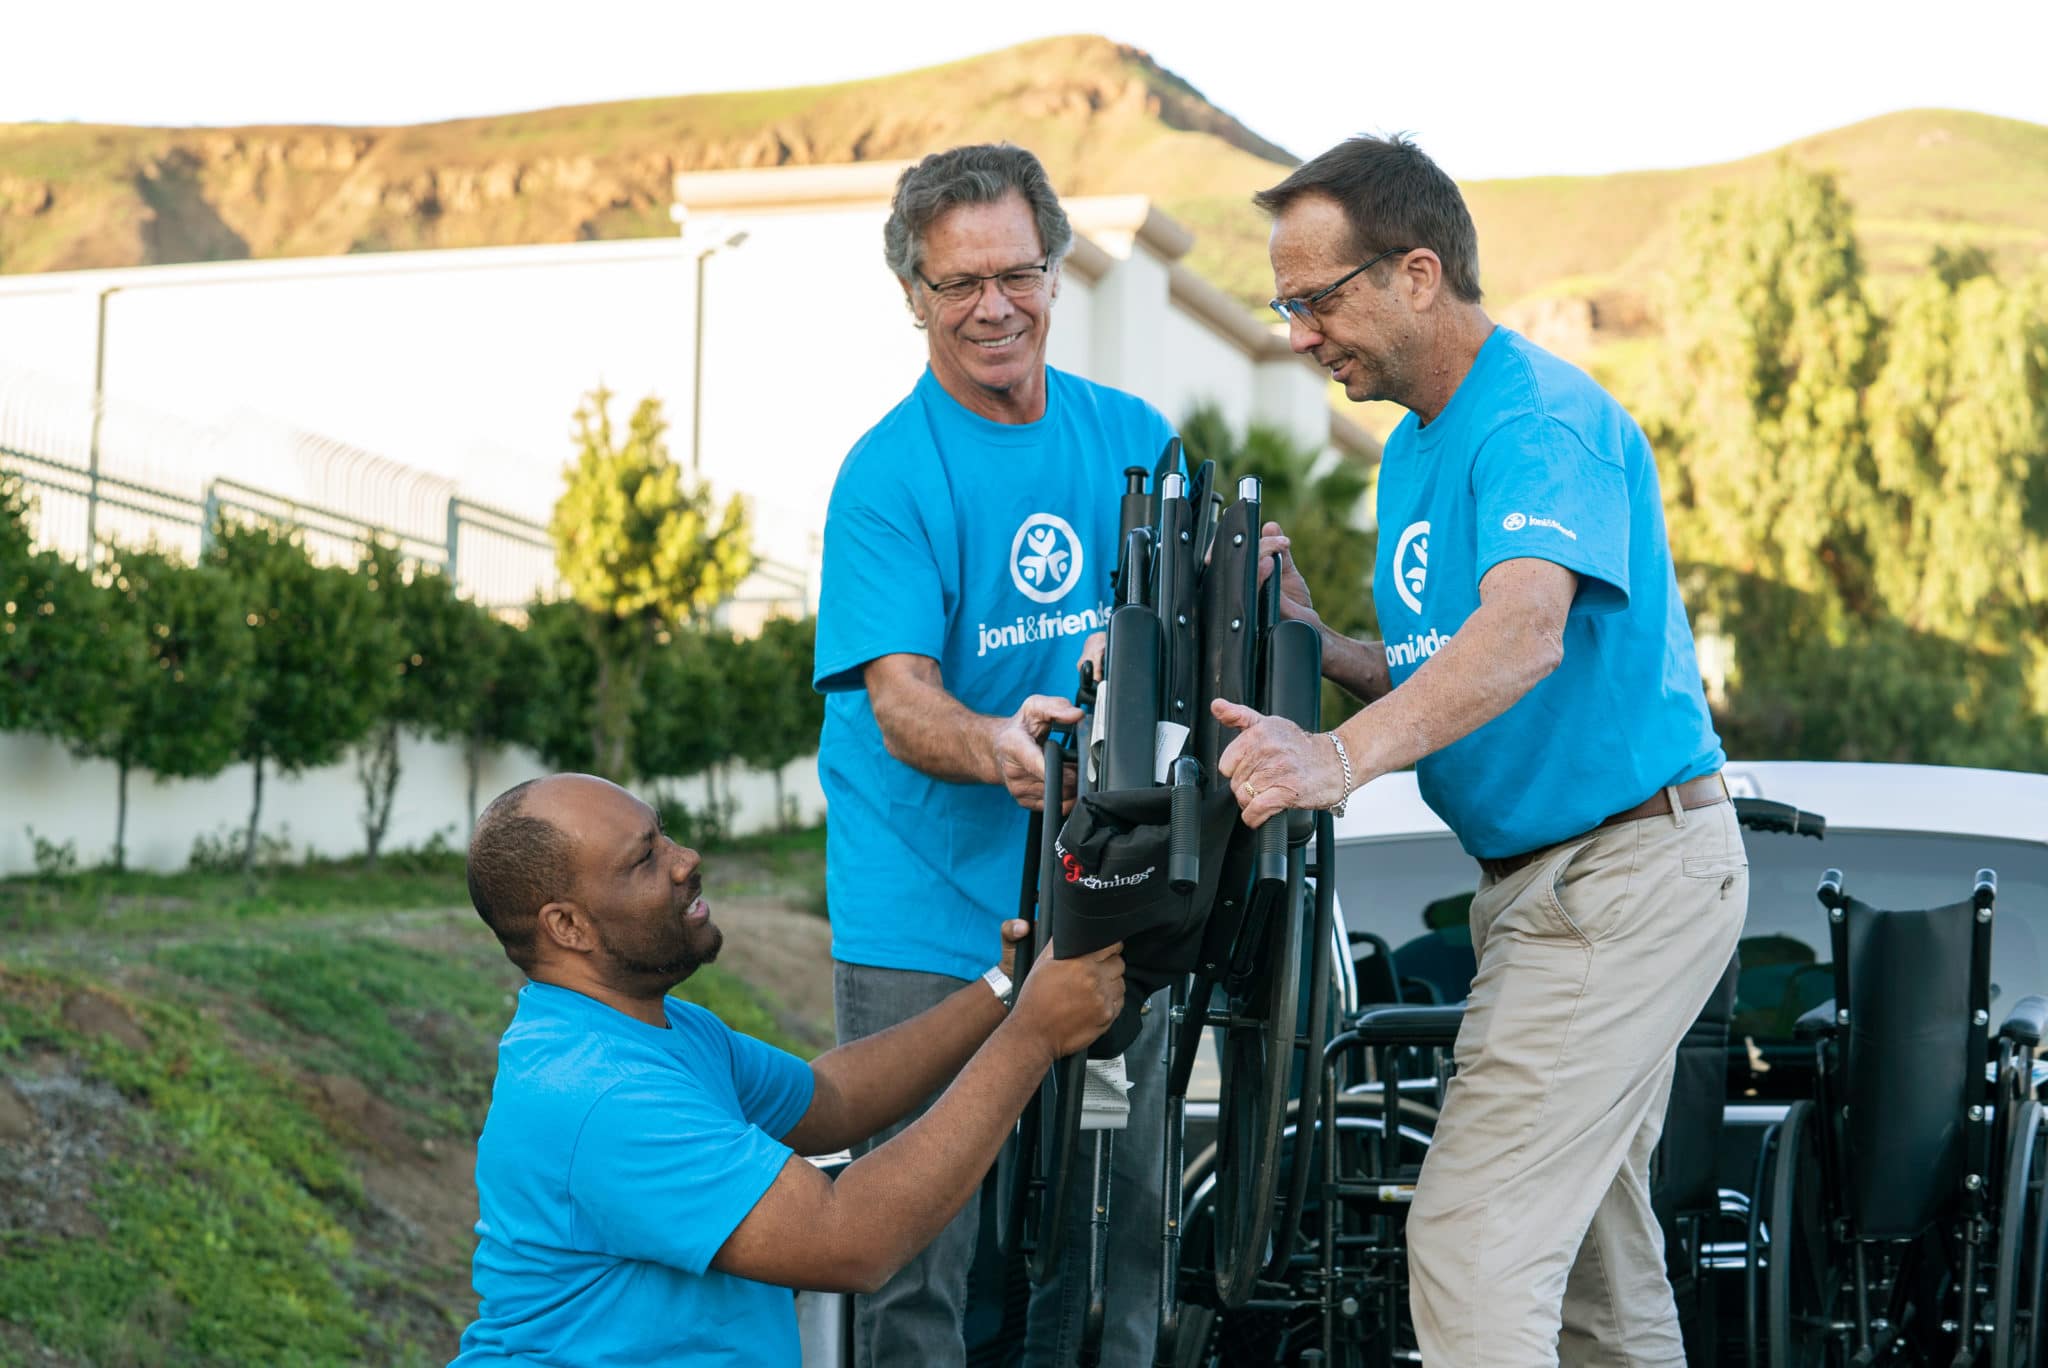 Volunteers collecting wheelchairs